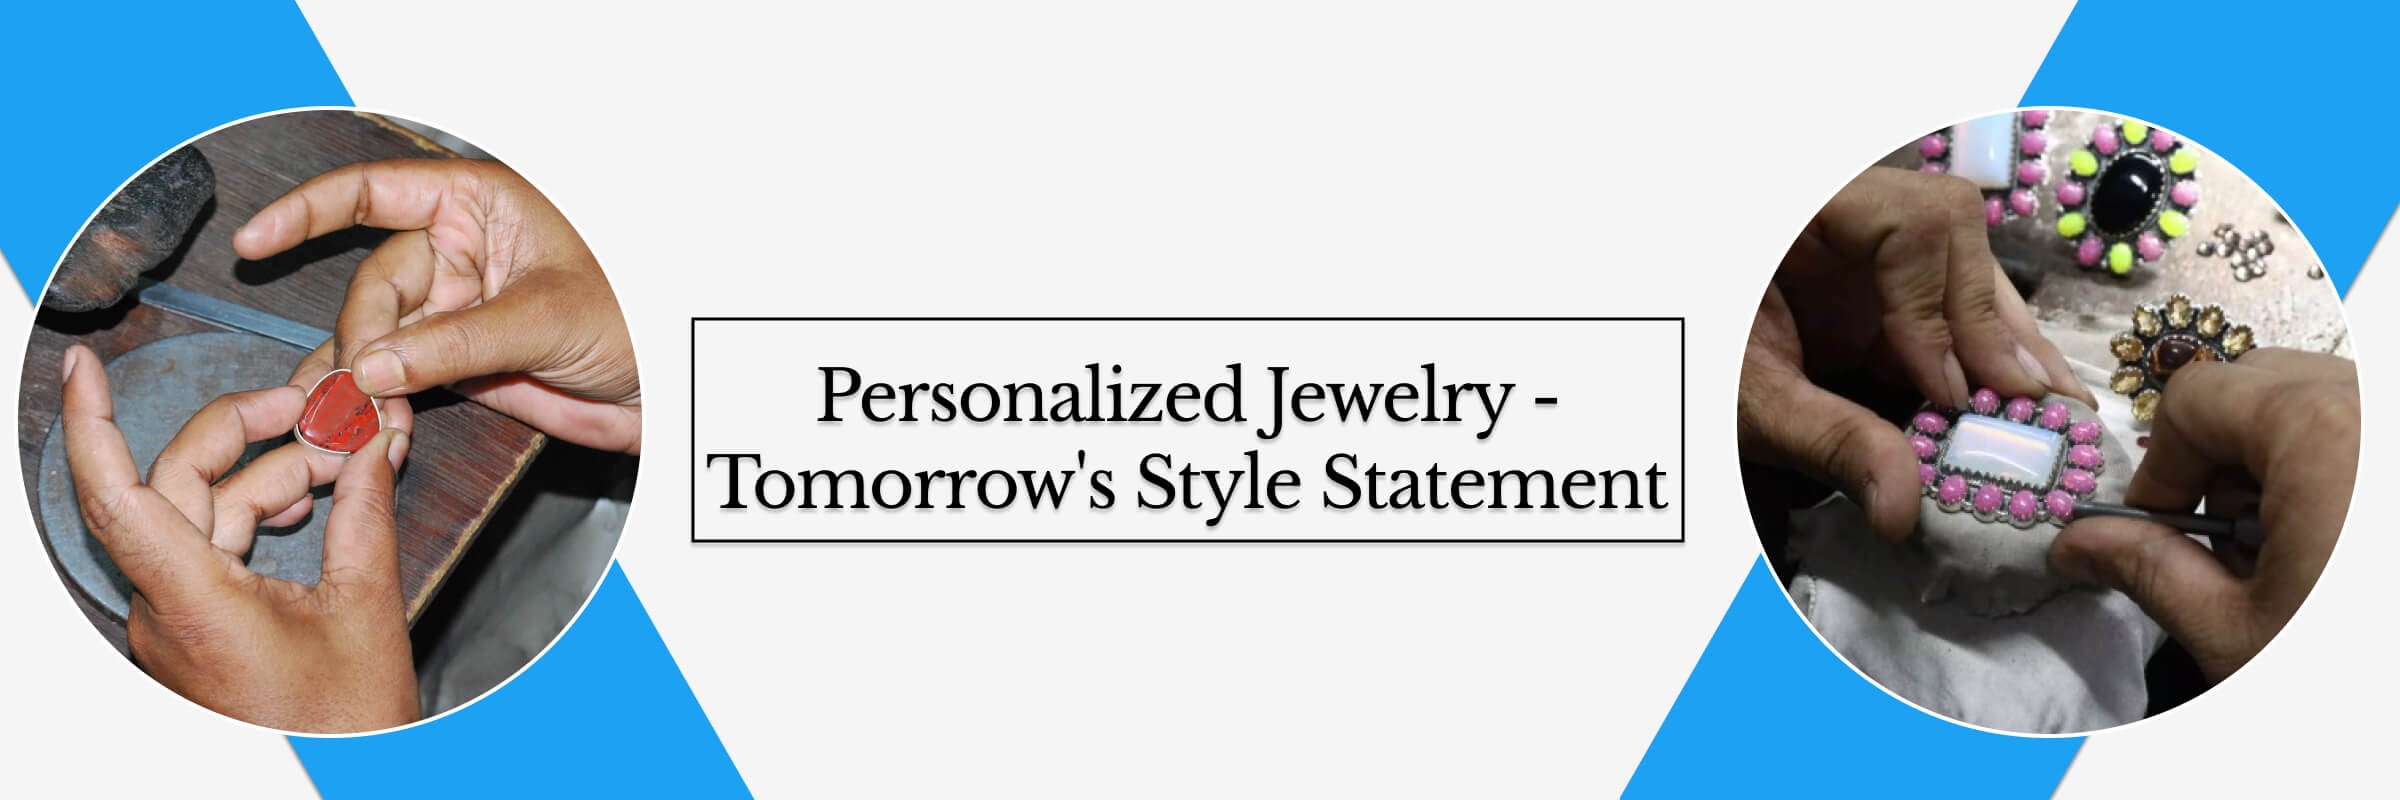 The Future of Personalized Jewelry